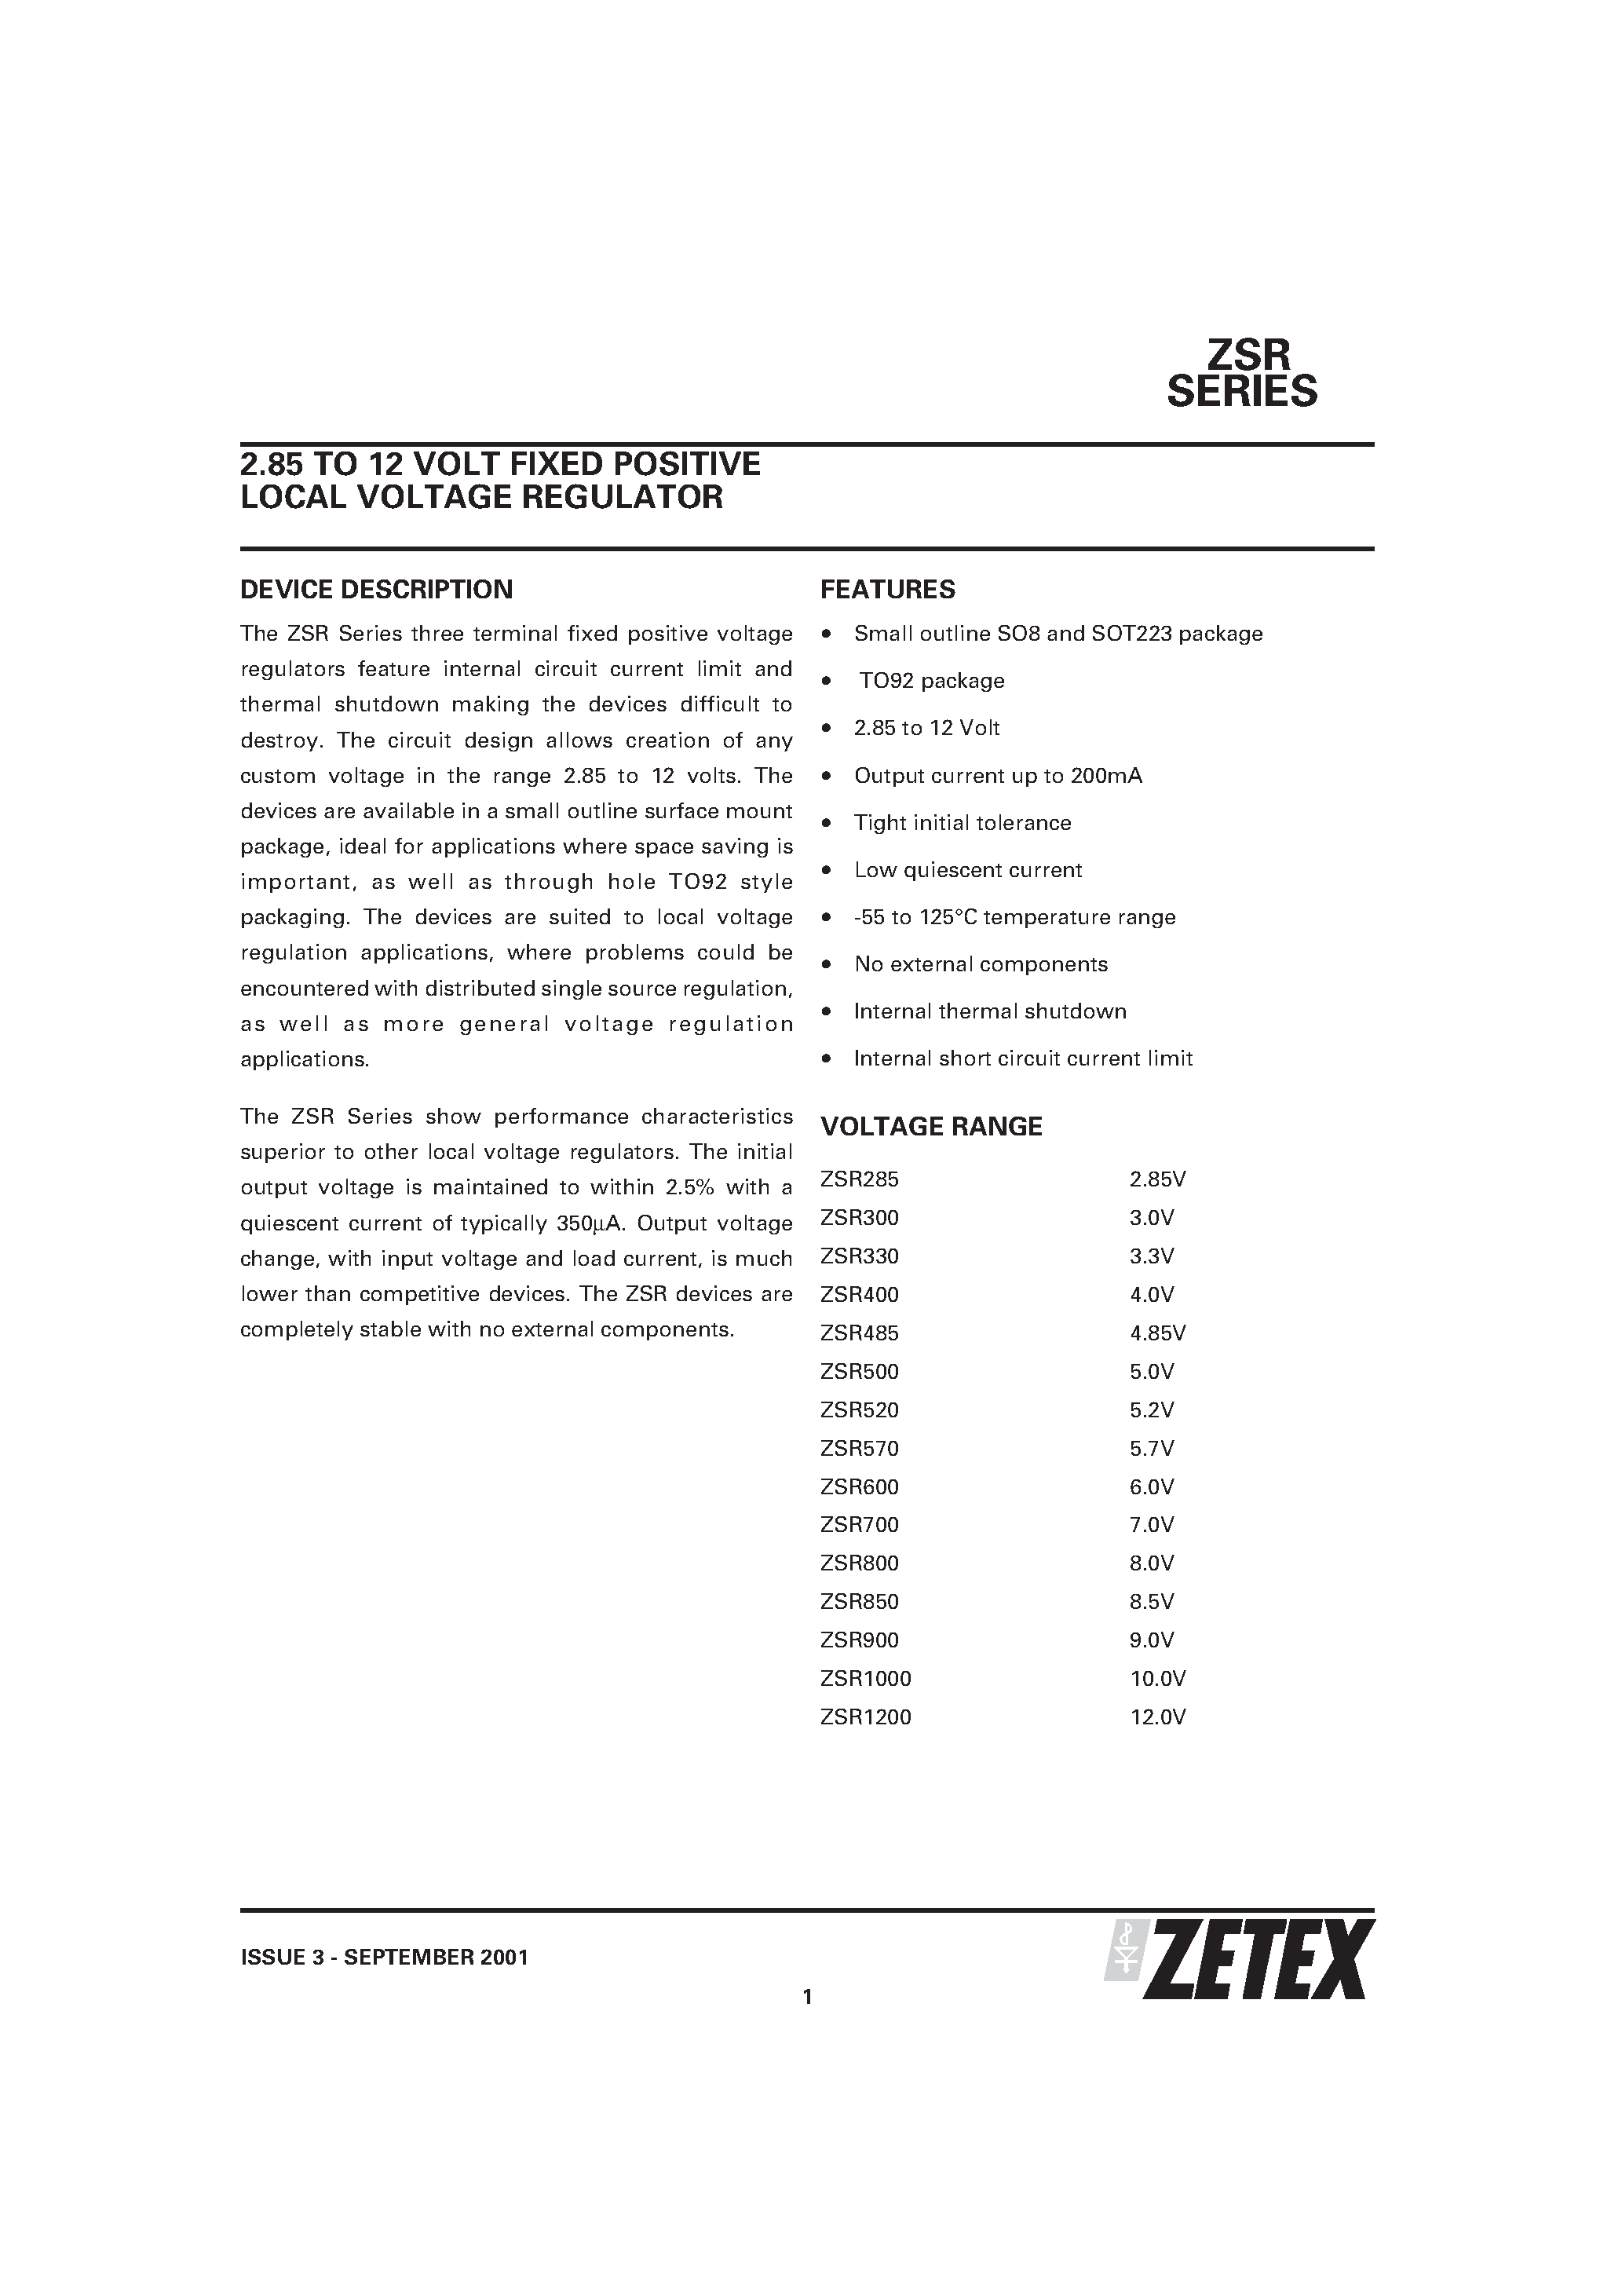 Datasheet ZSR520 - 2.85 TO 12 VOLT FIXED POSITIVE LOCAL VOLTAGE REGULATOR page 1